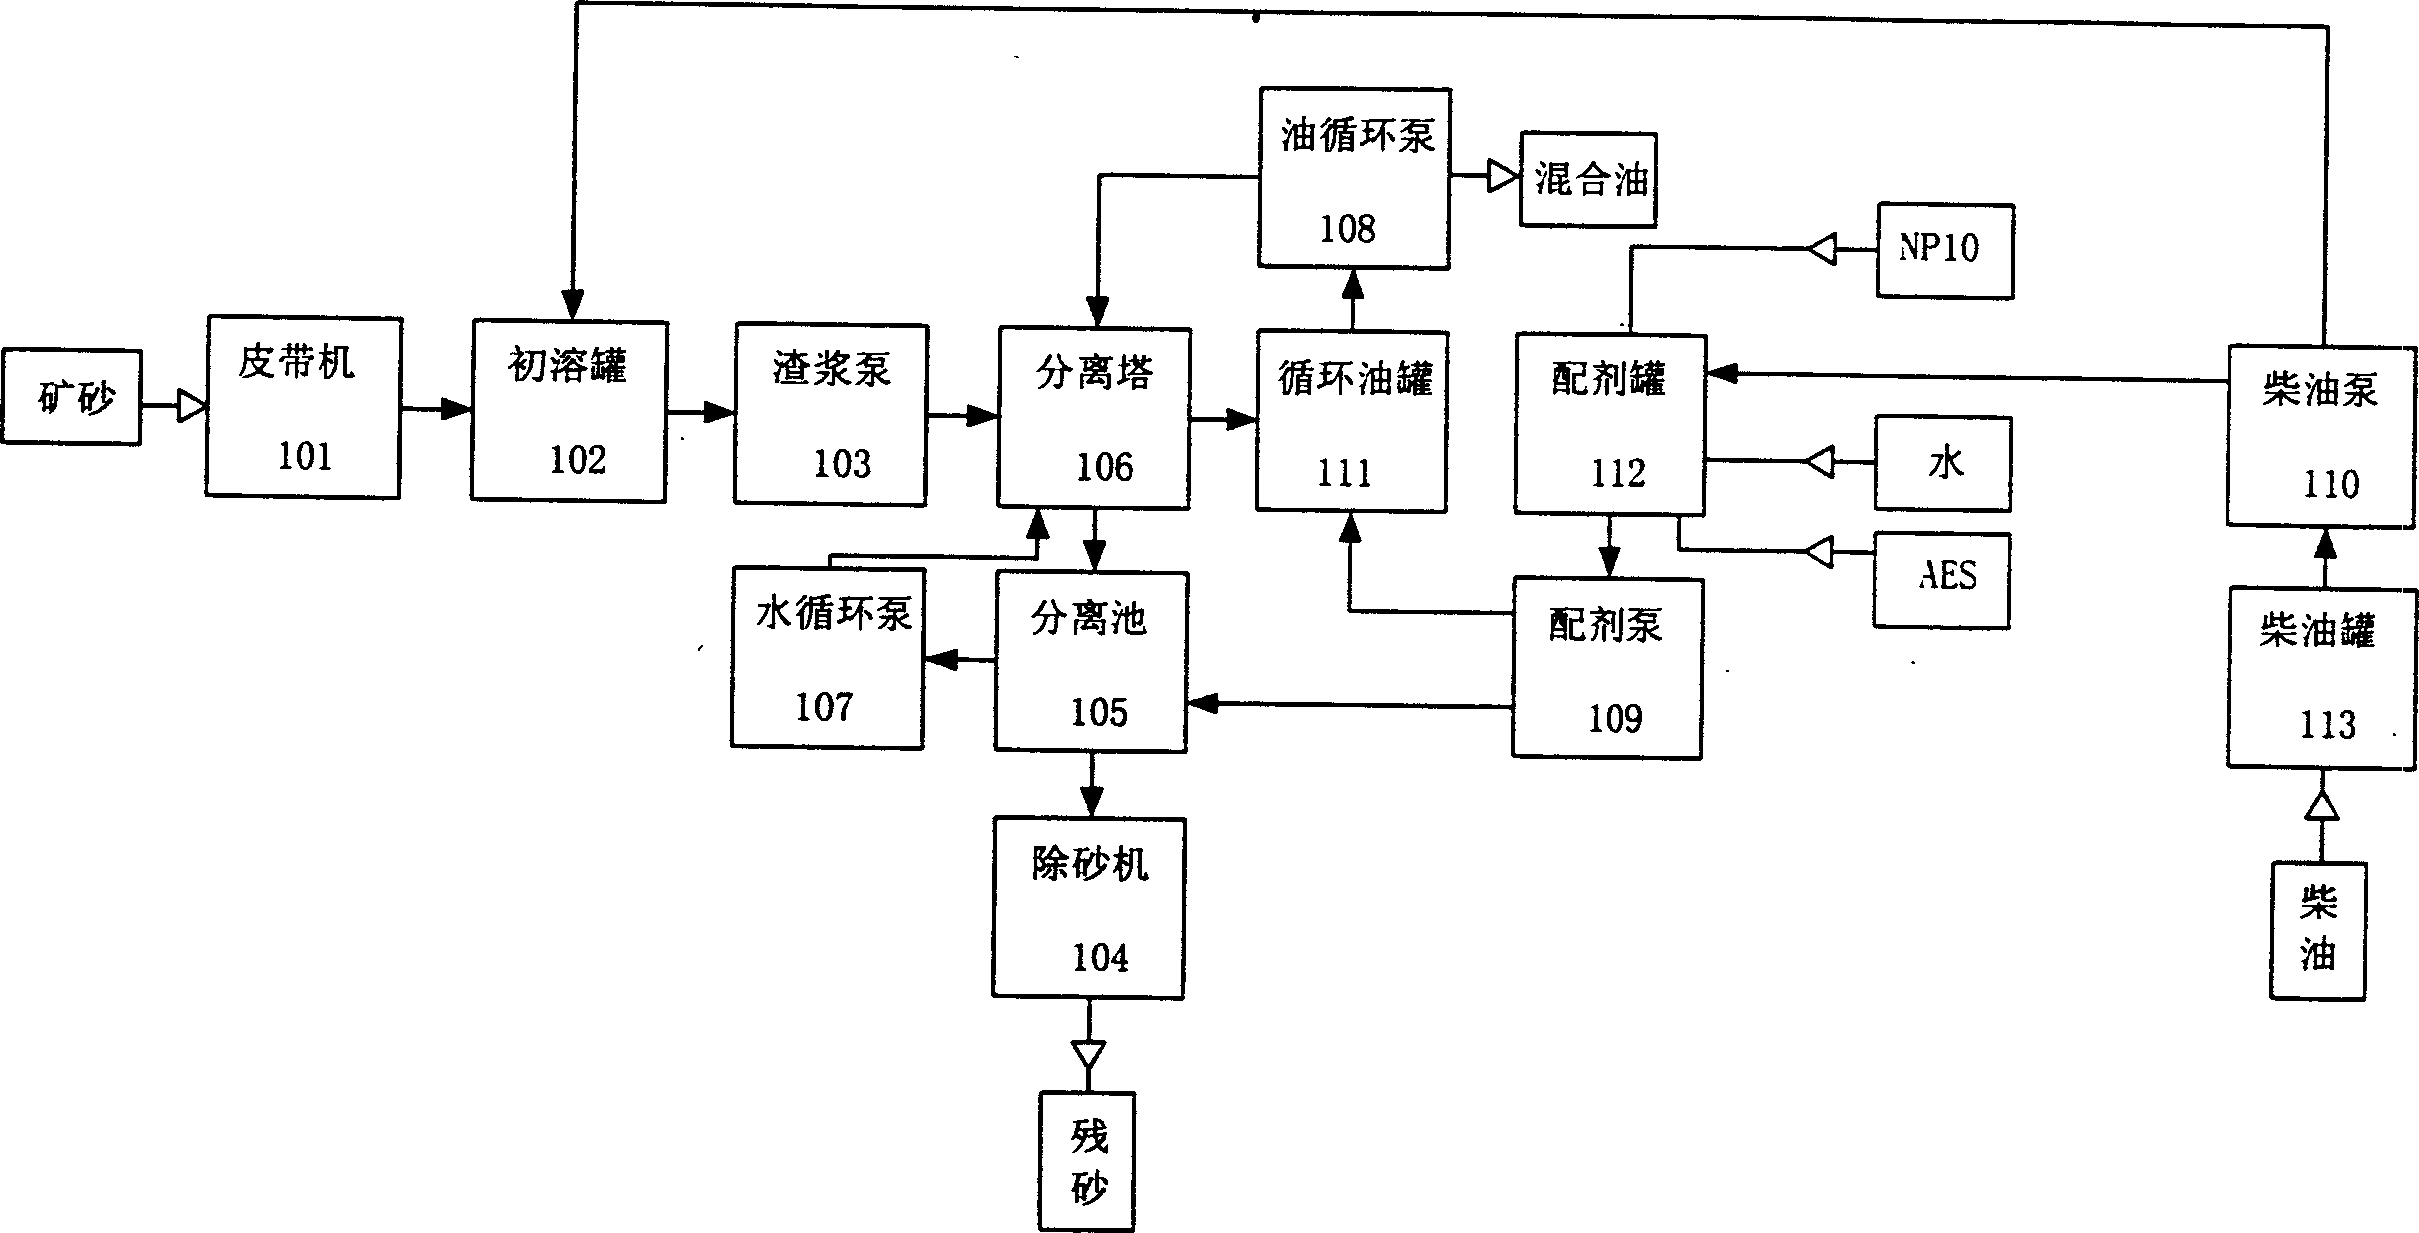 Continuous oil sand separating method and apparatus